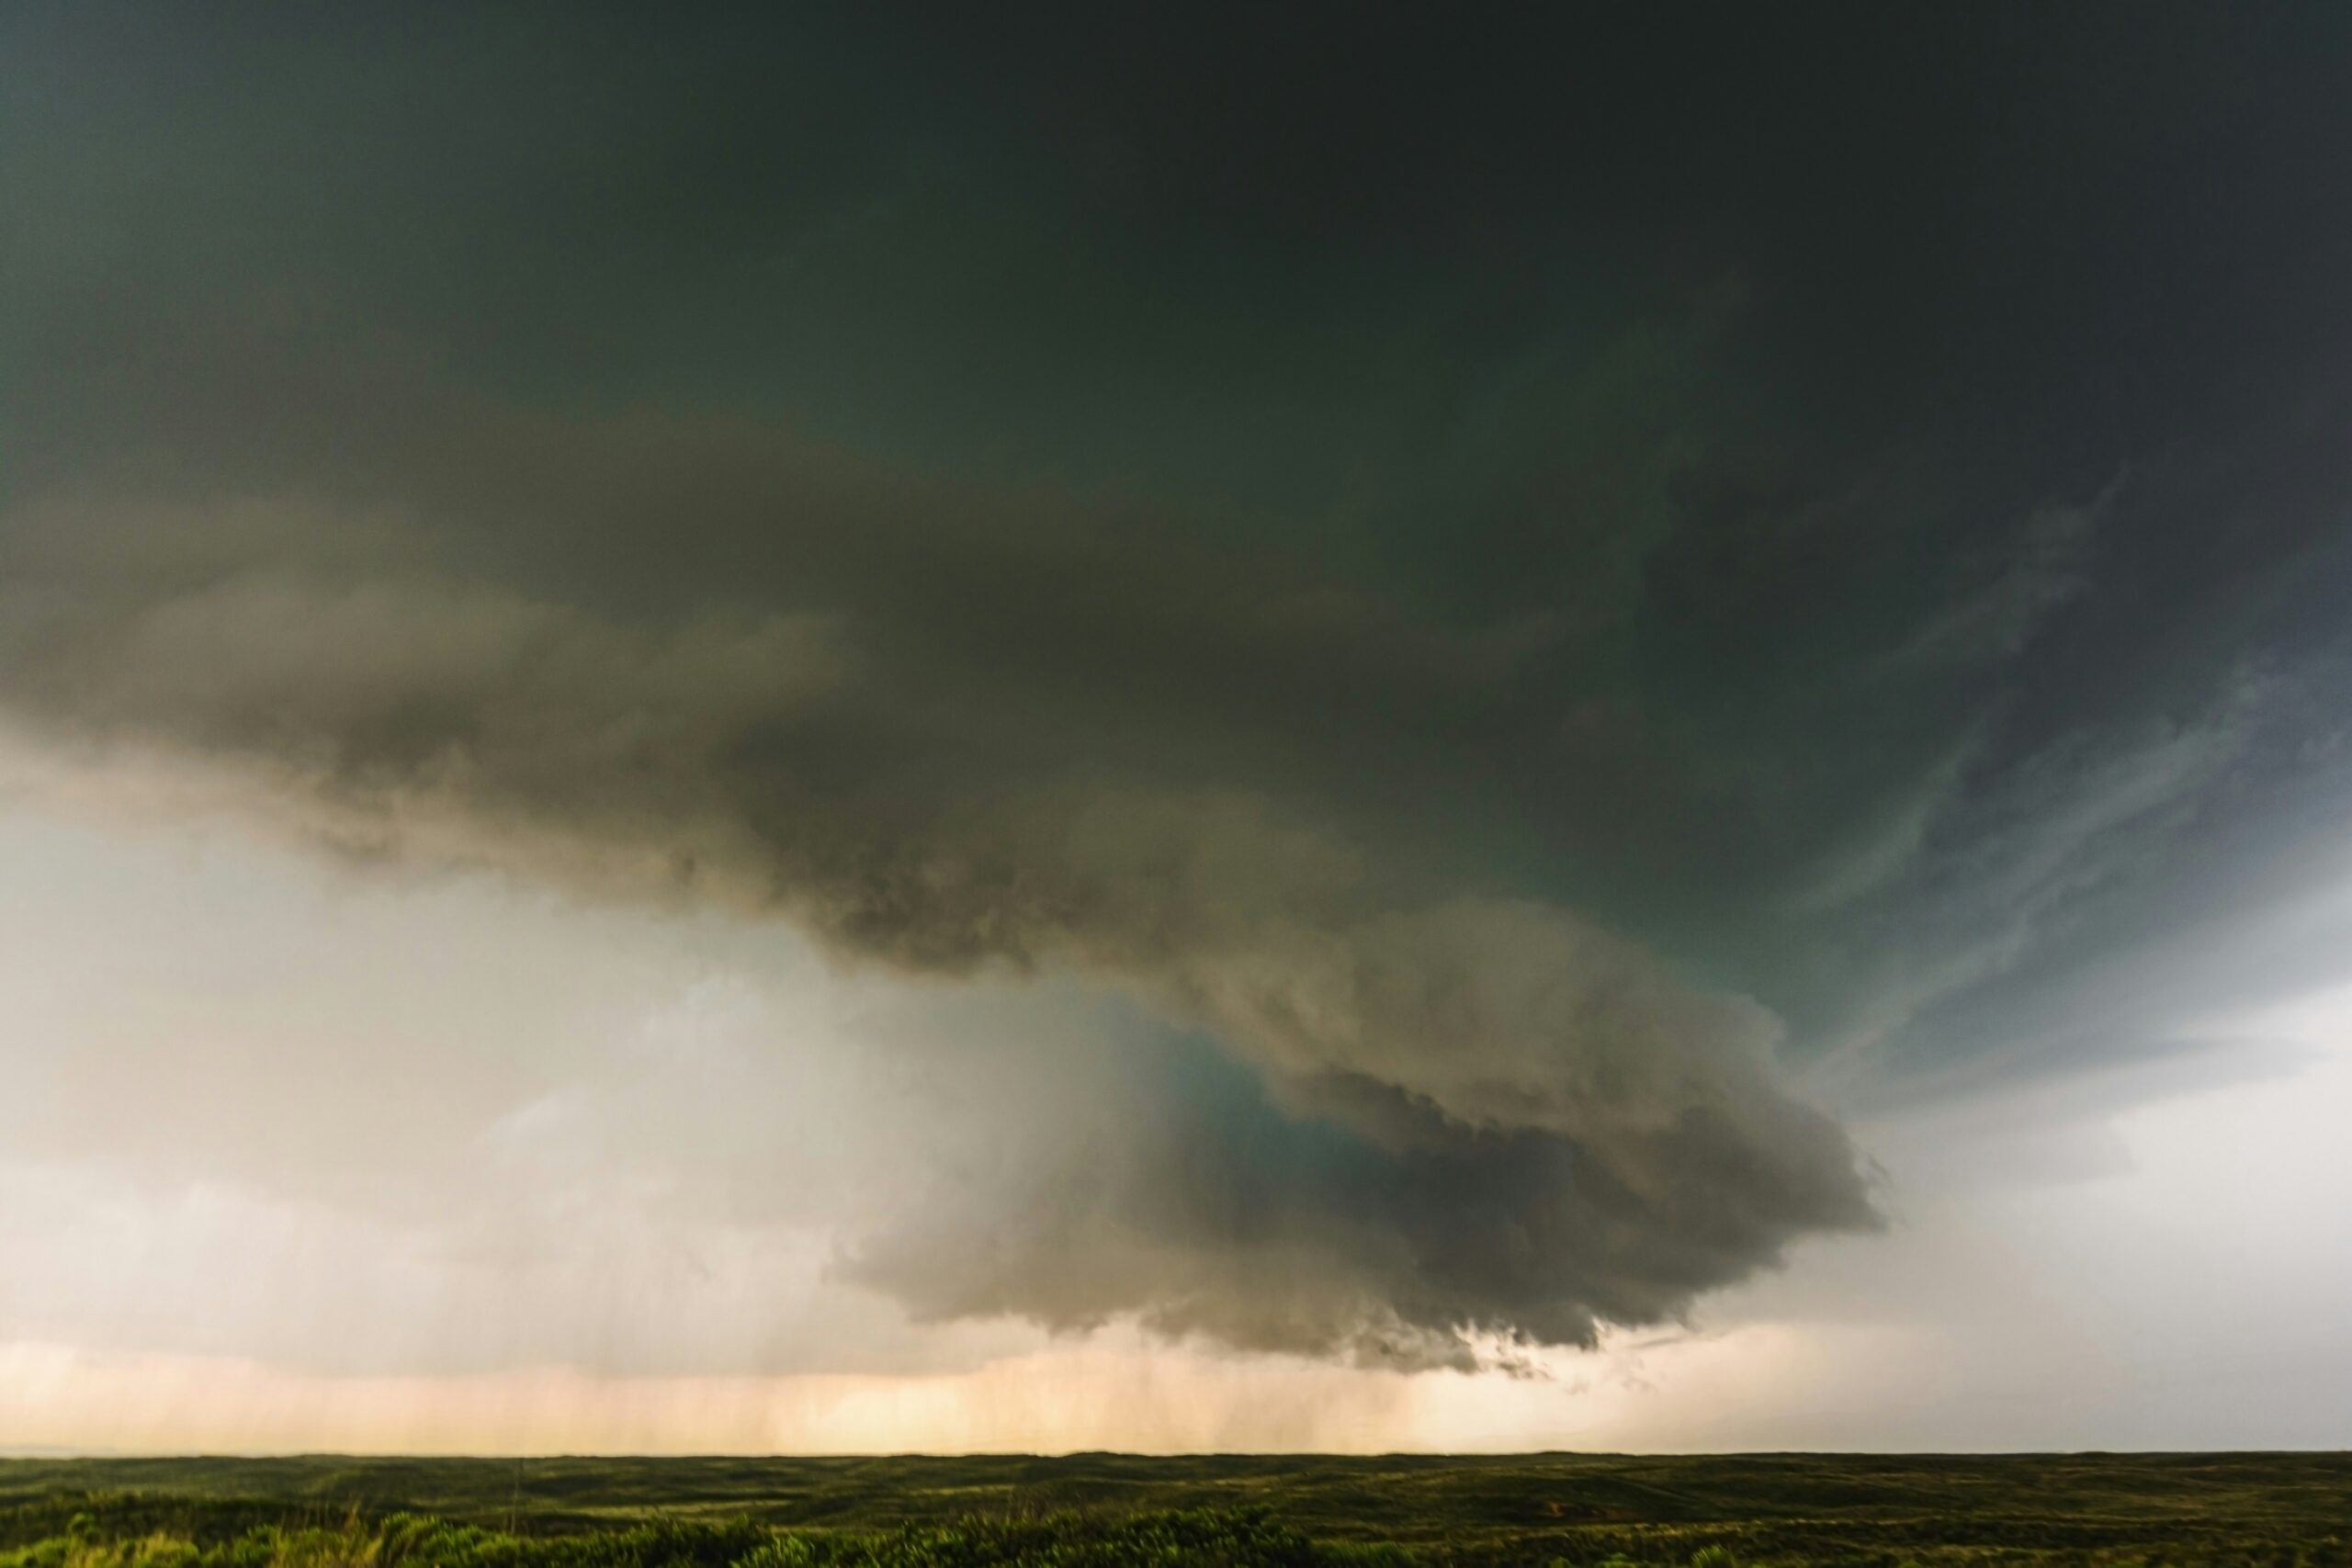 Protecting your home in the face of severe weather